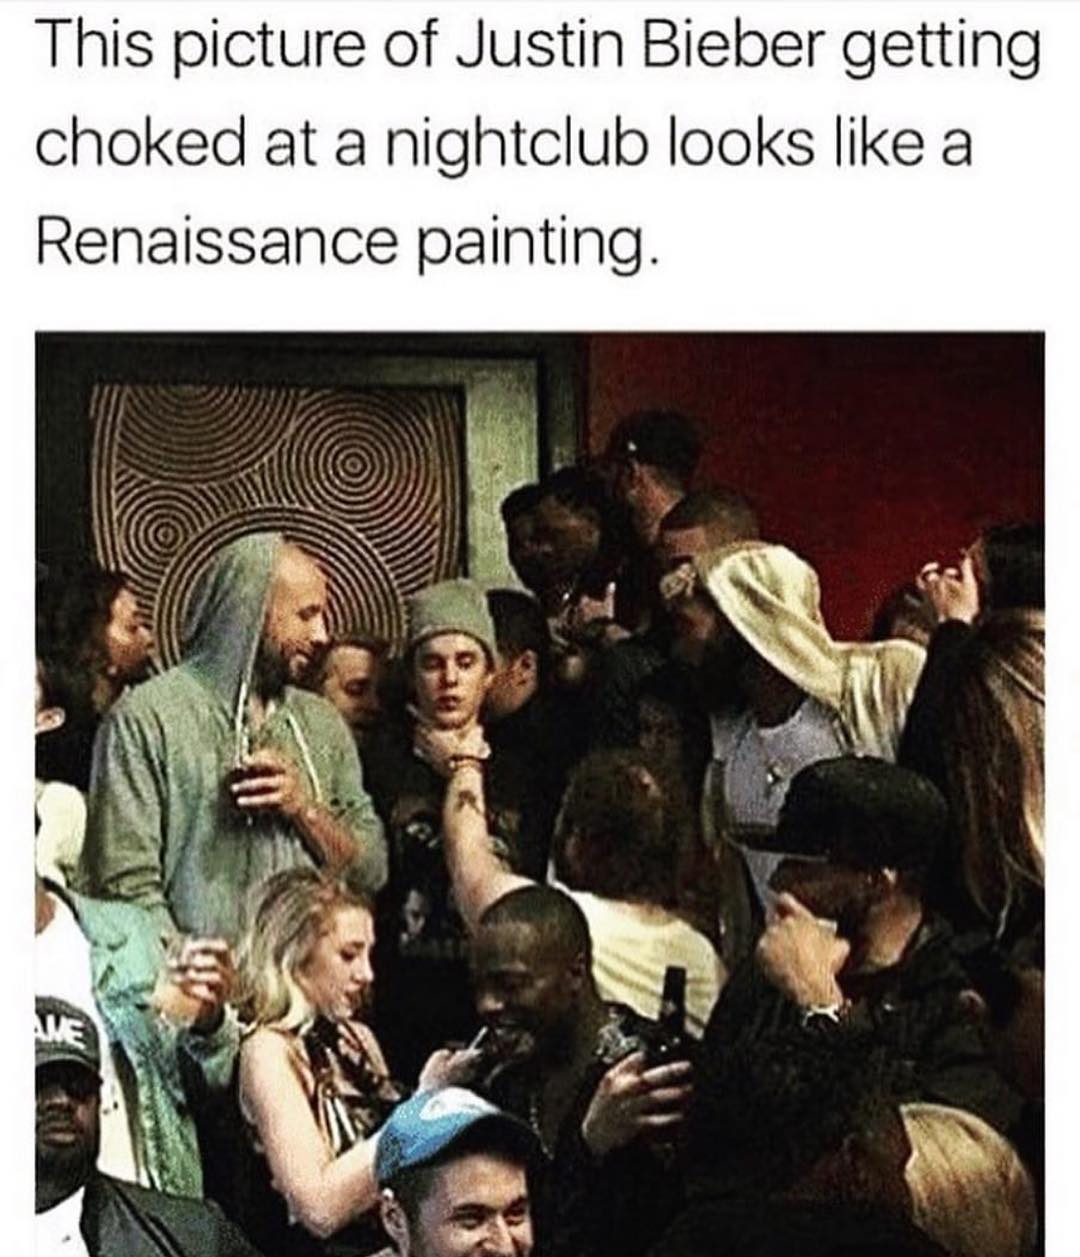 This picture of Justin Bieber getting choked at a nightclub looks like a Renaissance painting.